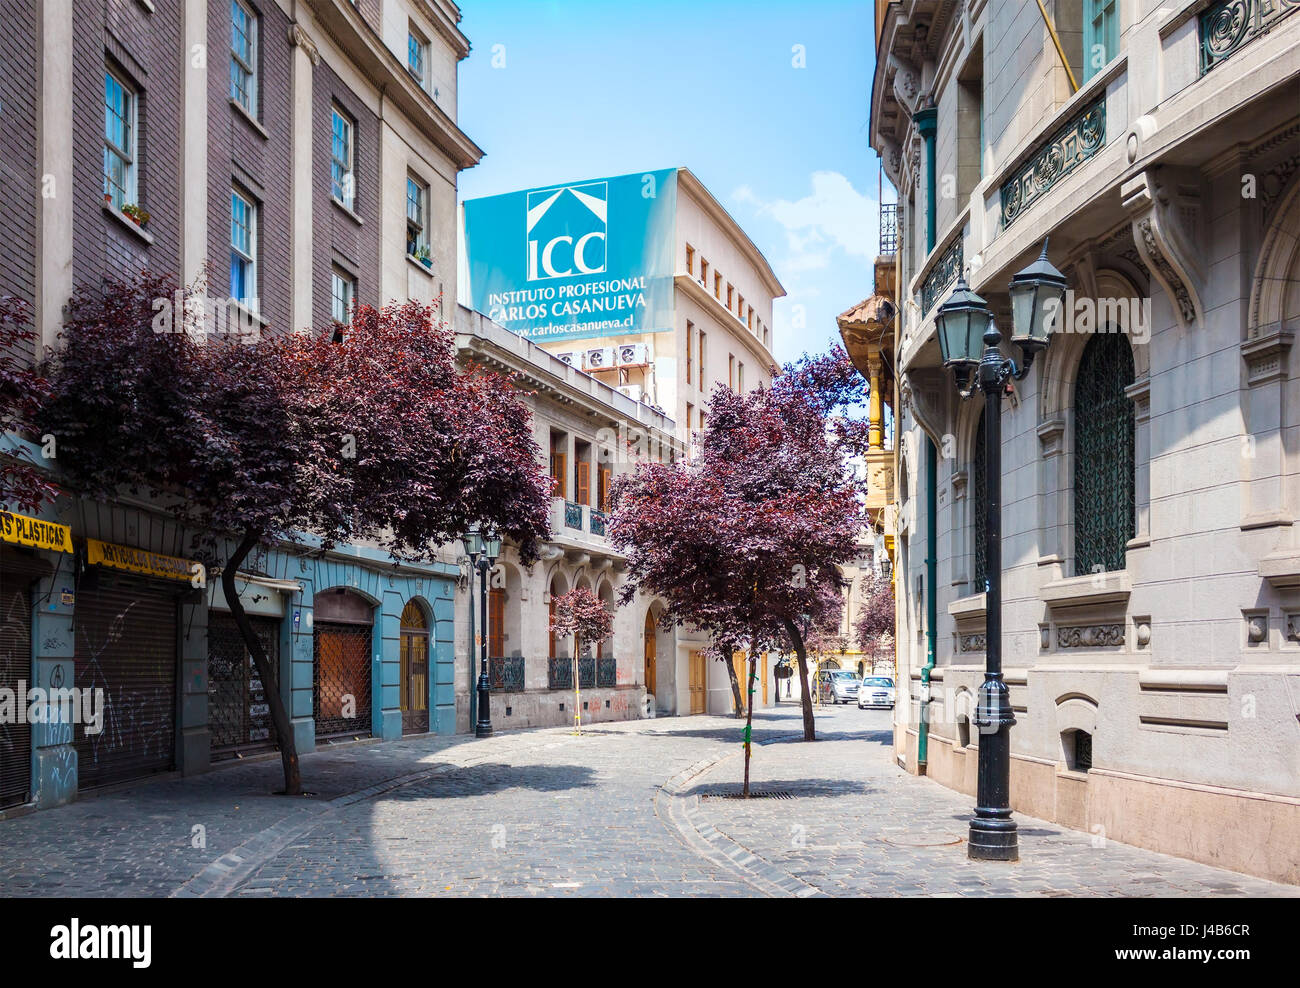 SANTIAGO, CHILE - OCTOBER 23, 2016: Street of Barrio Paris-Londres neighborhood. This european style area includes shops, hotels and cobble stone stre Stock Photo